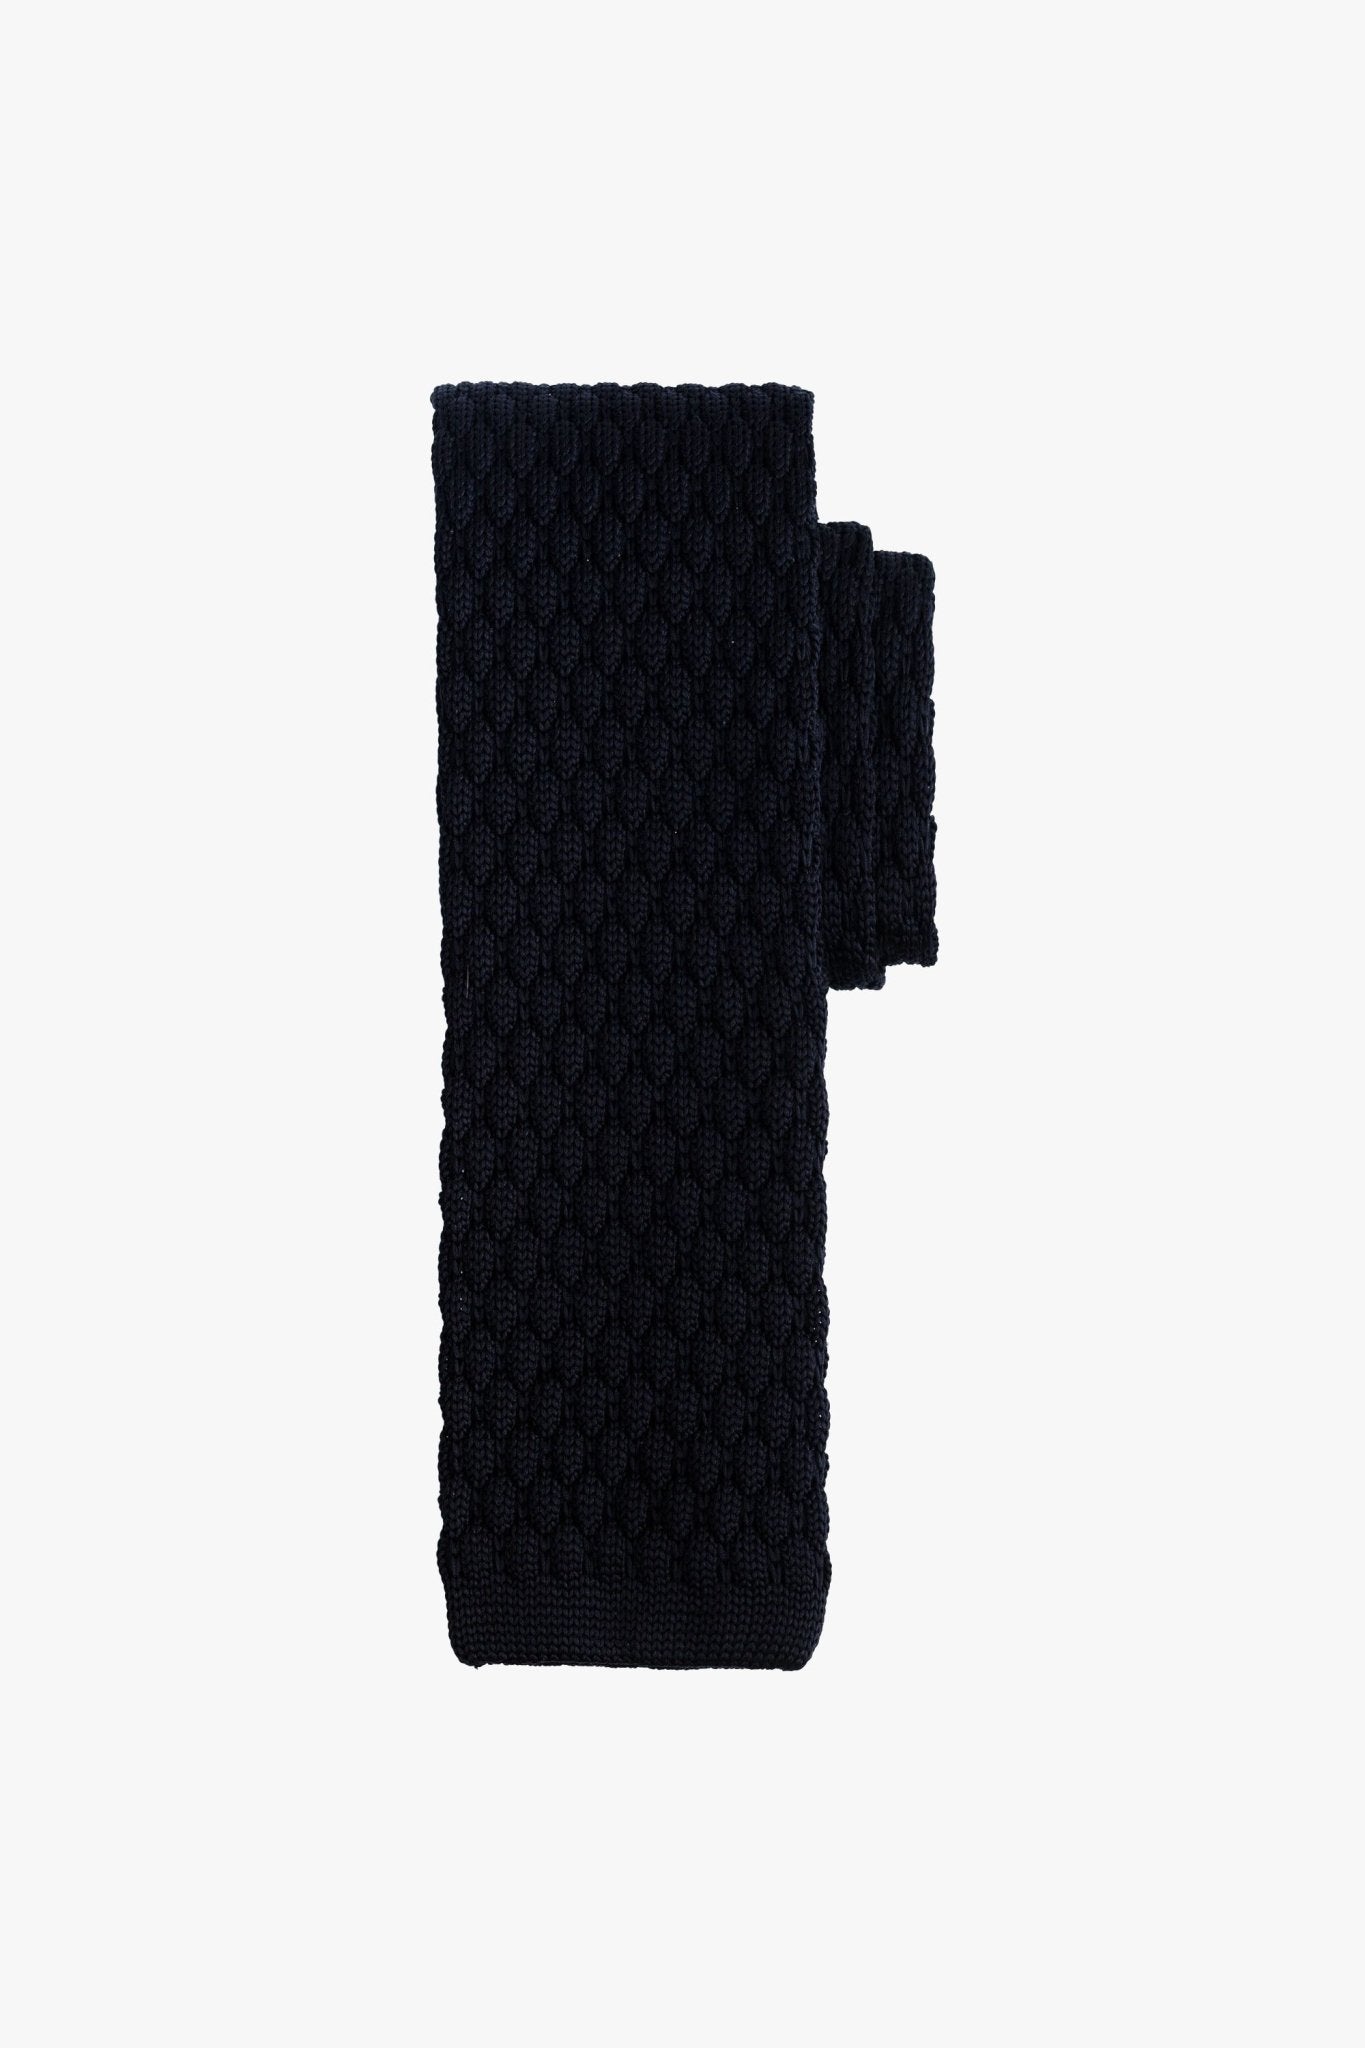 Black Knitted Tie - My Suited Life